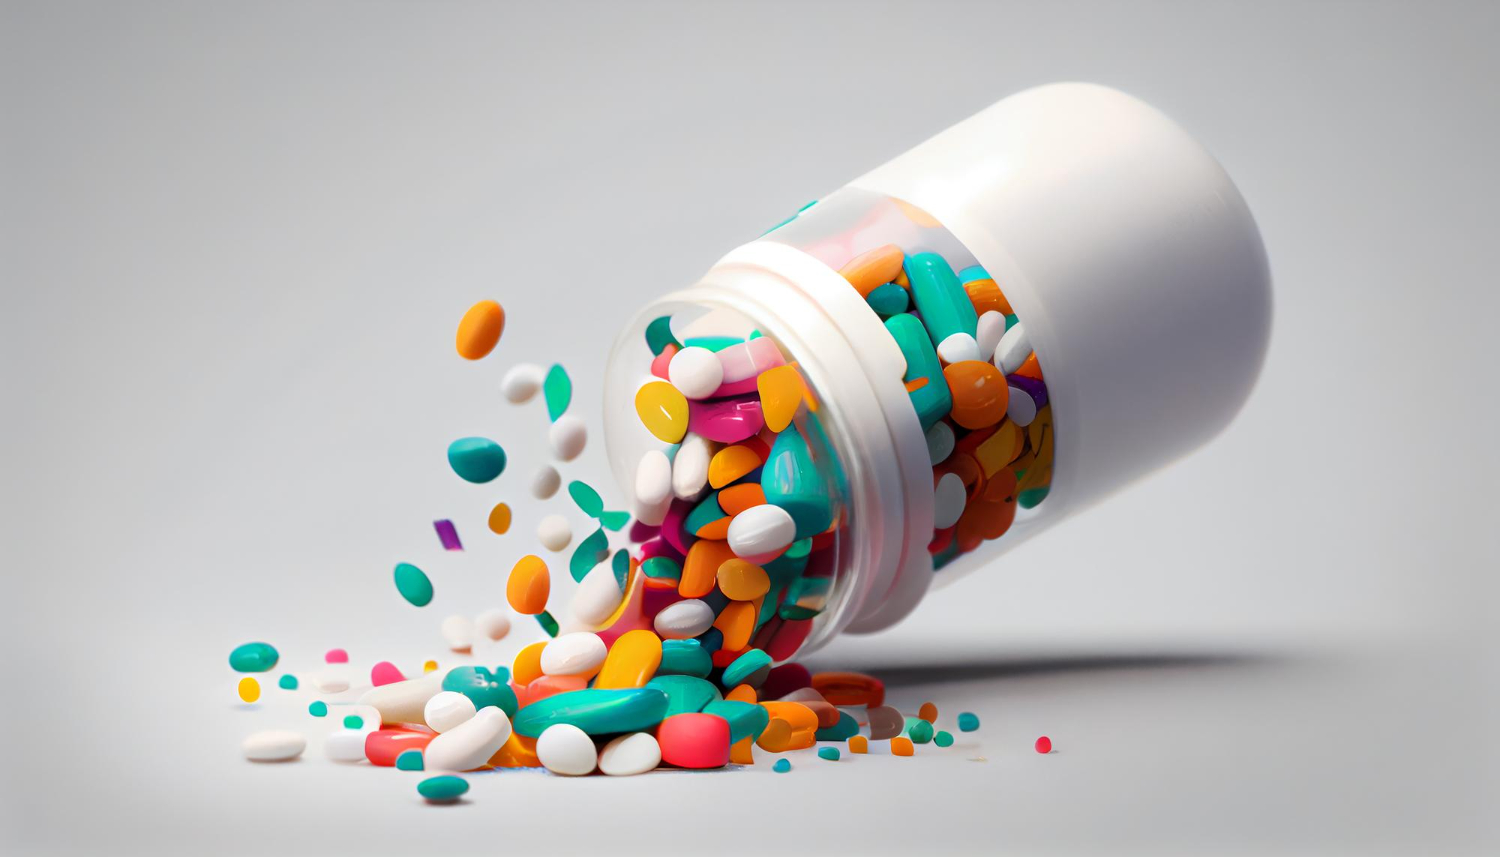 Unbranded Pharma Campaigns: Shaping Health Awareness Without Branding